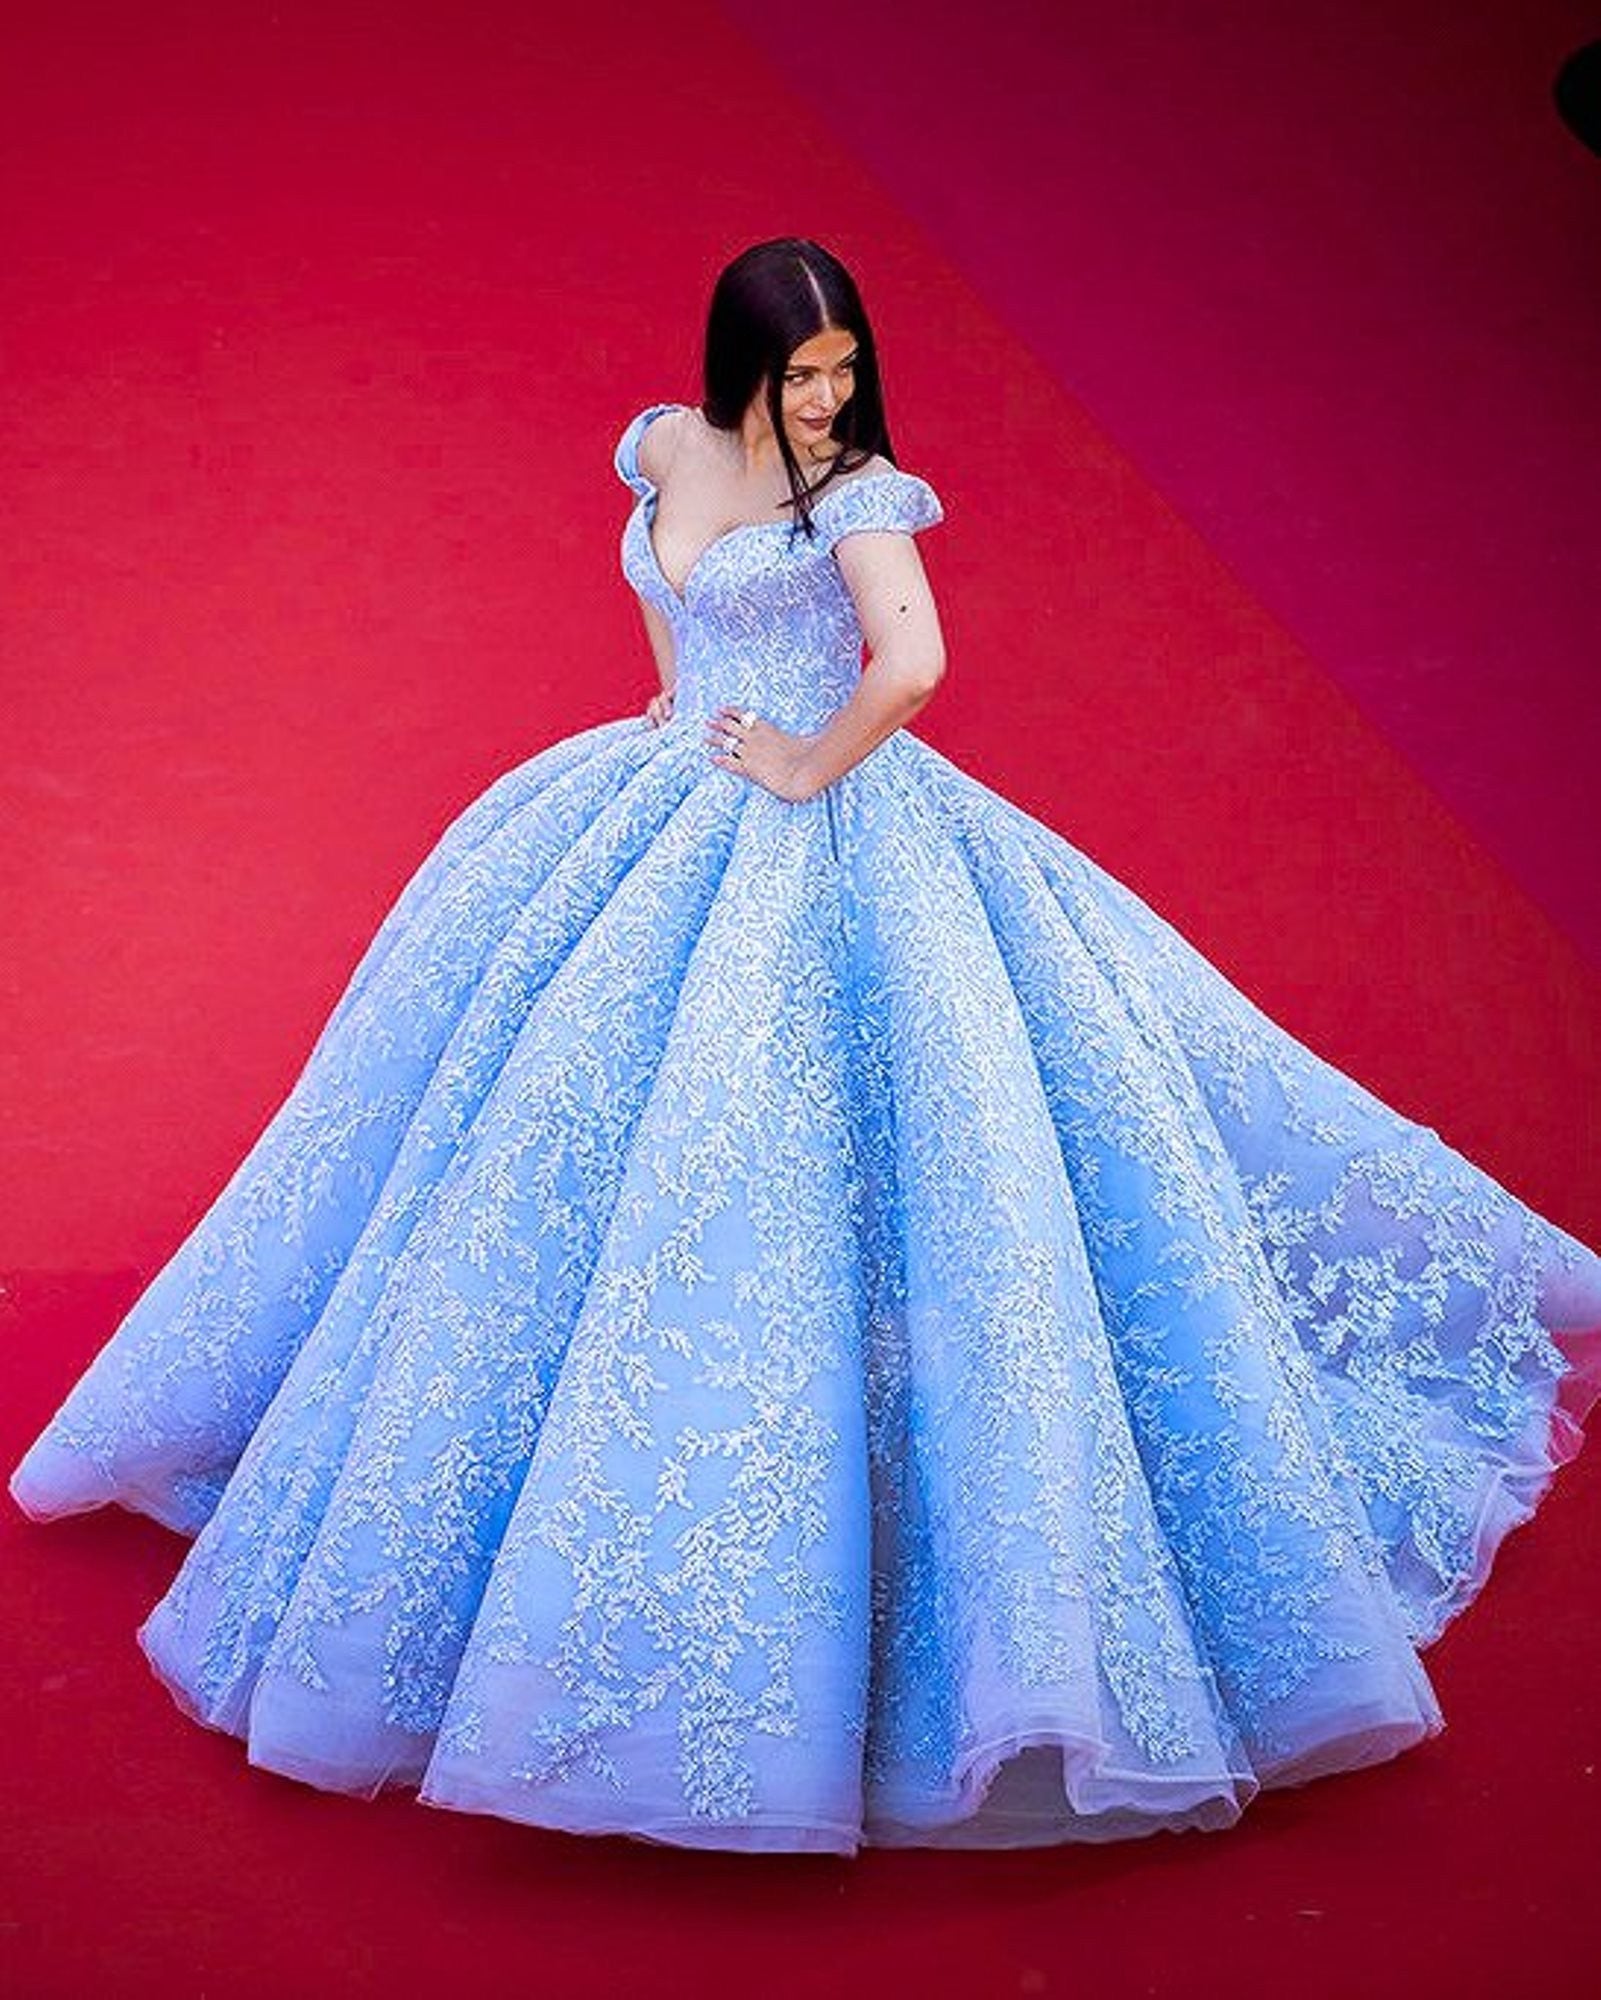 Aishwarya Rai Bachchan looked ethereal in a powder-blue brocade ball gown by Michael Cinco